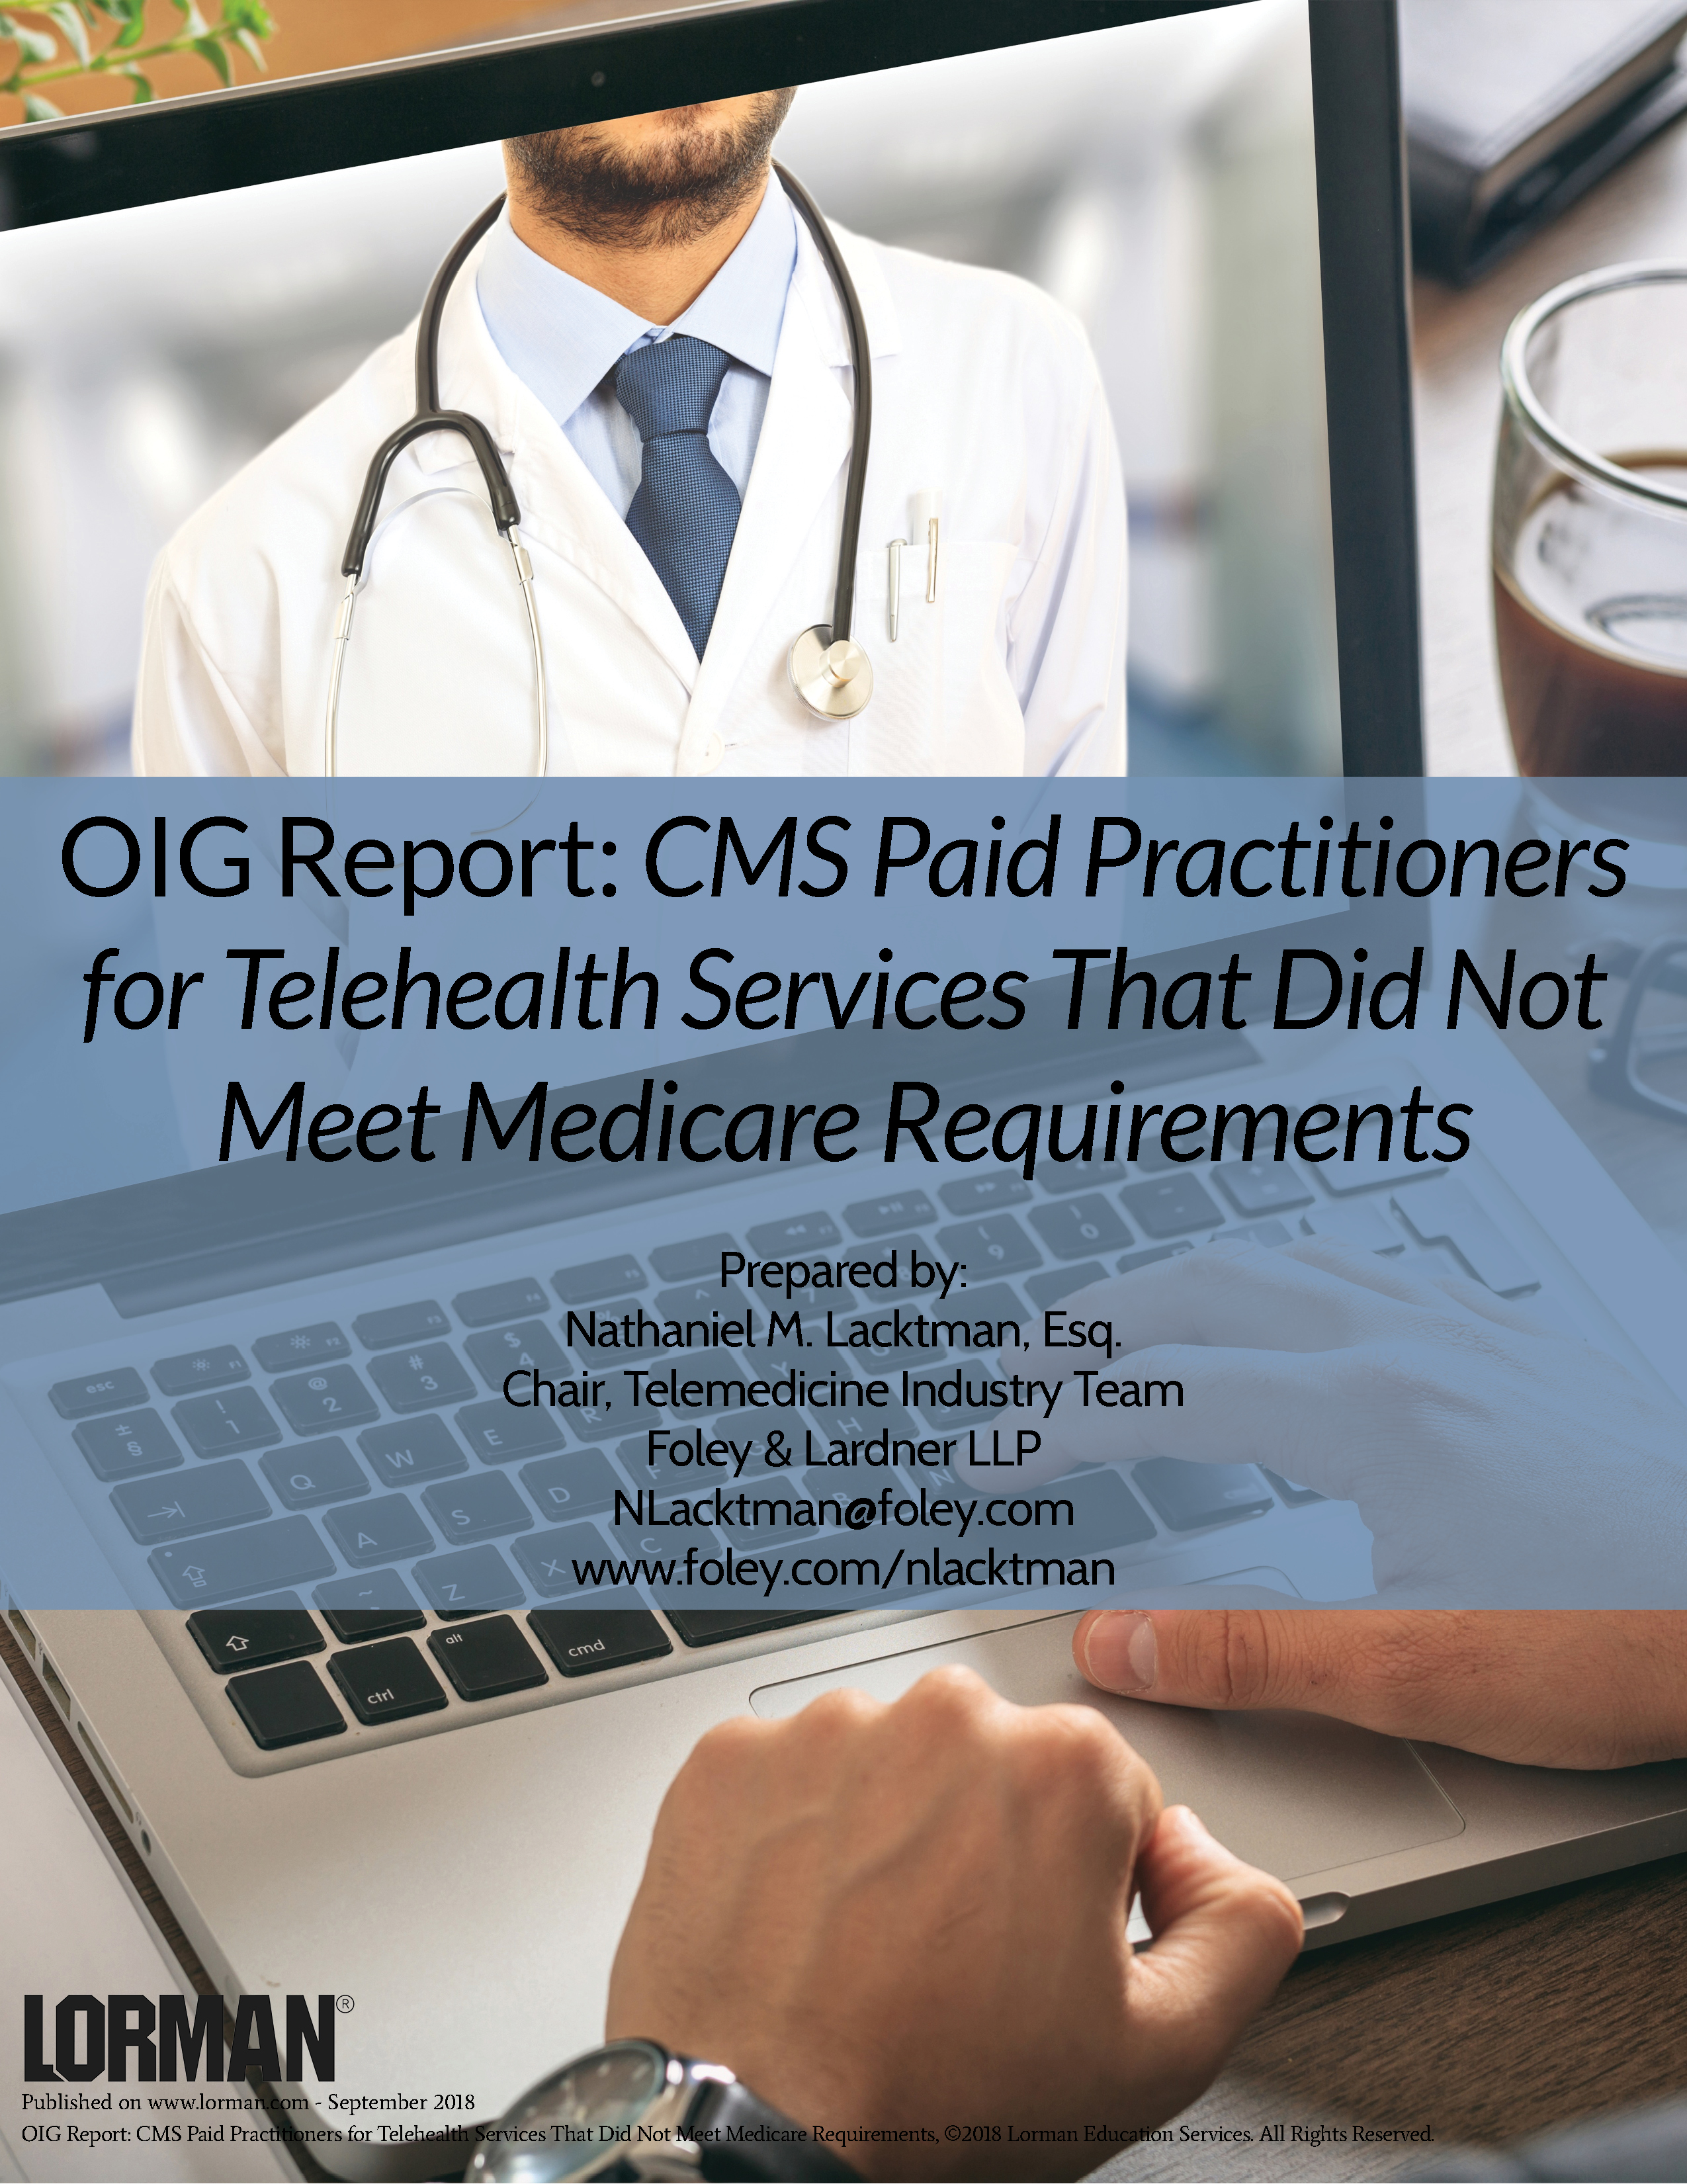 OIG Report: CMS Paid Practitioners for Telehealth Services That Did Not Meet Medicare Requirements